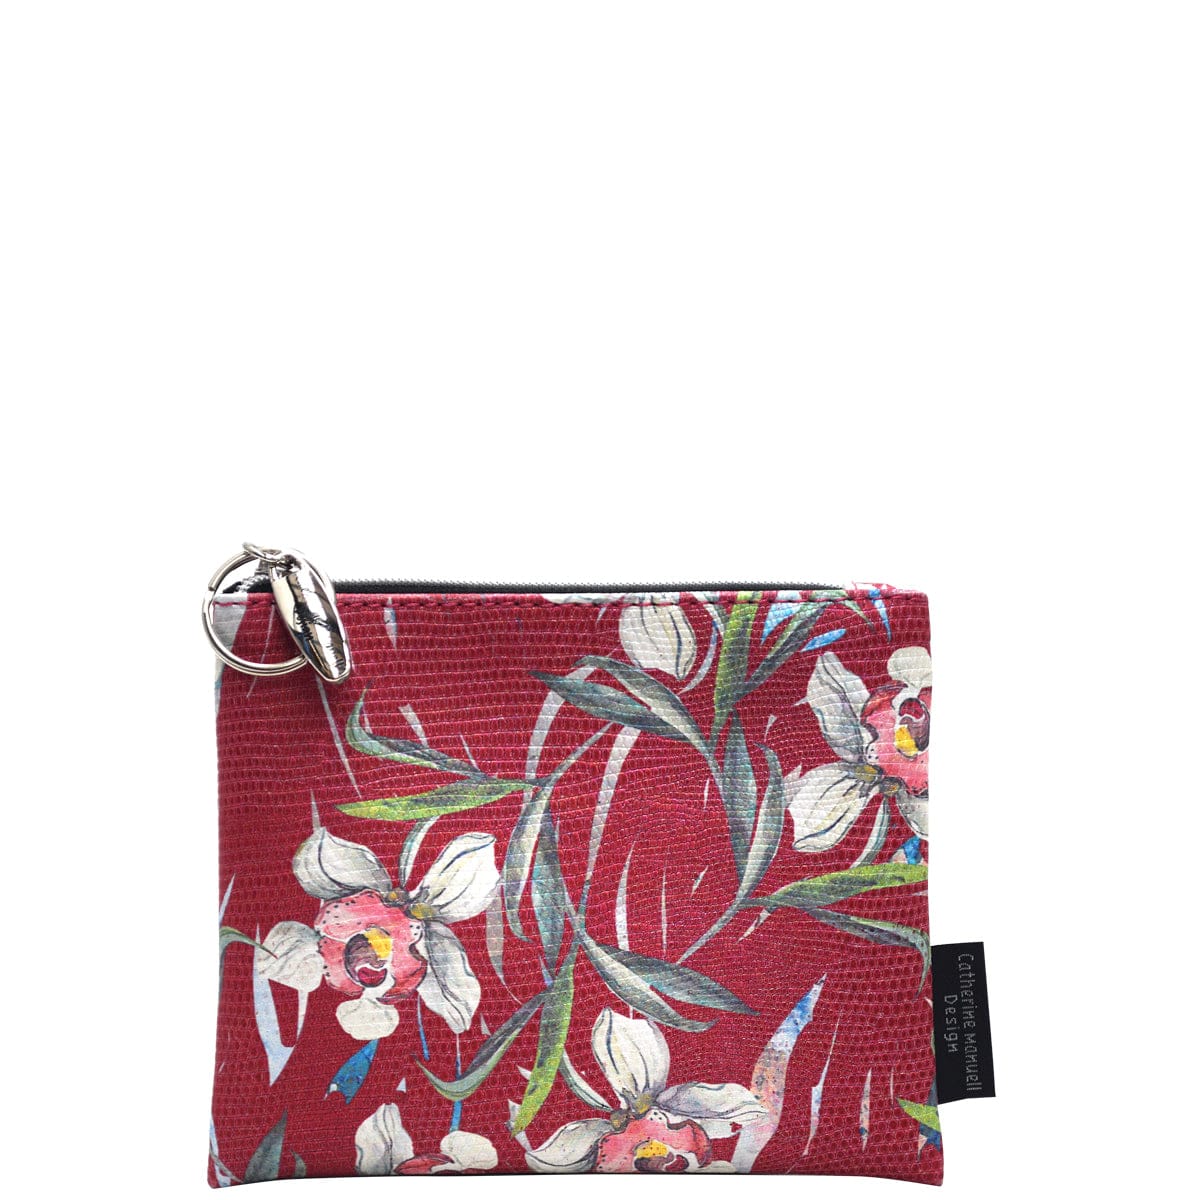 Everyday Purse - Red Rose Flower